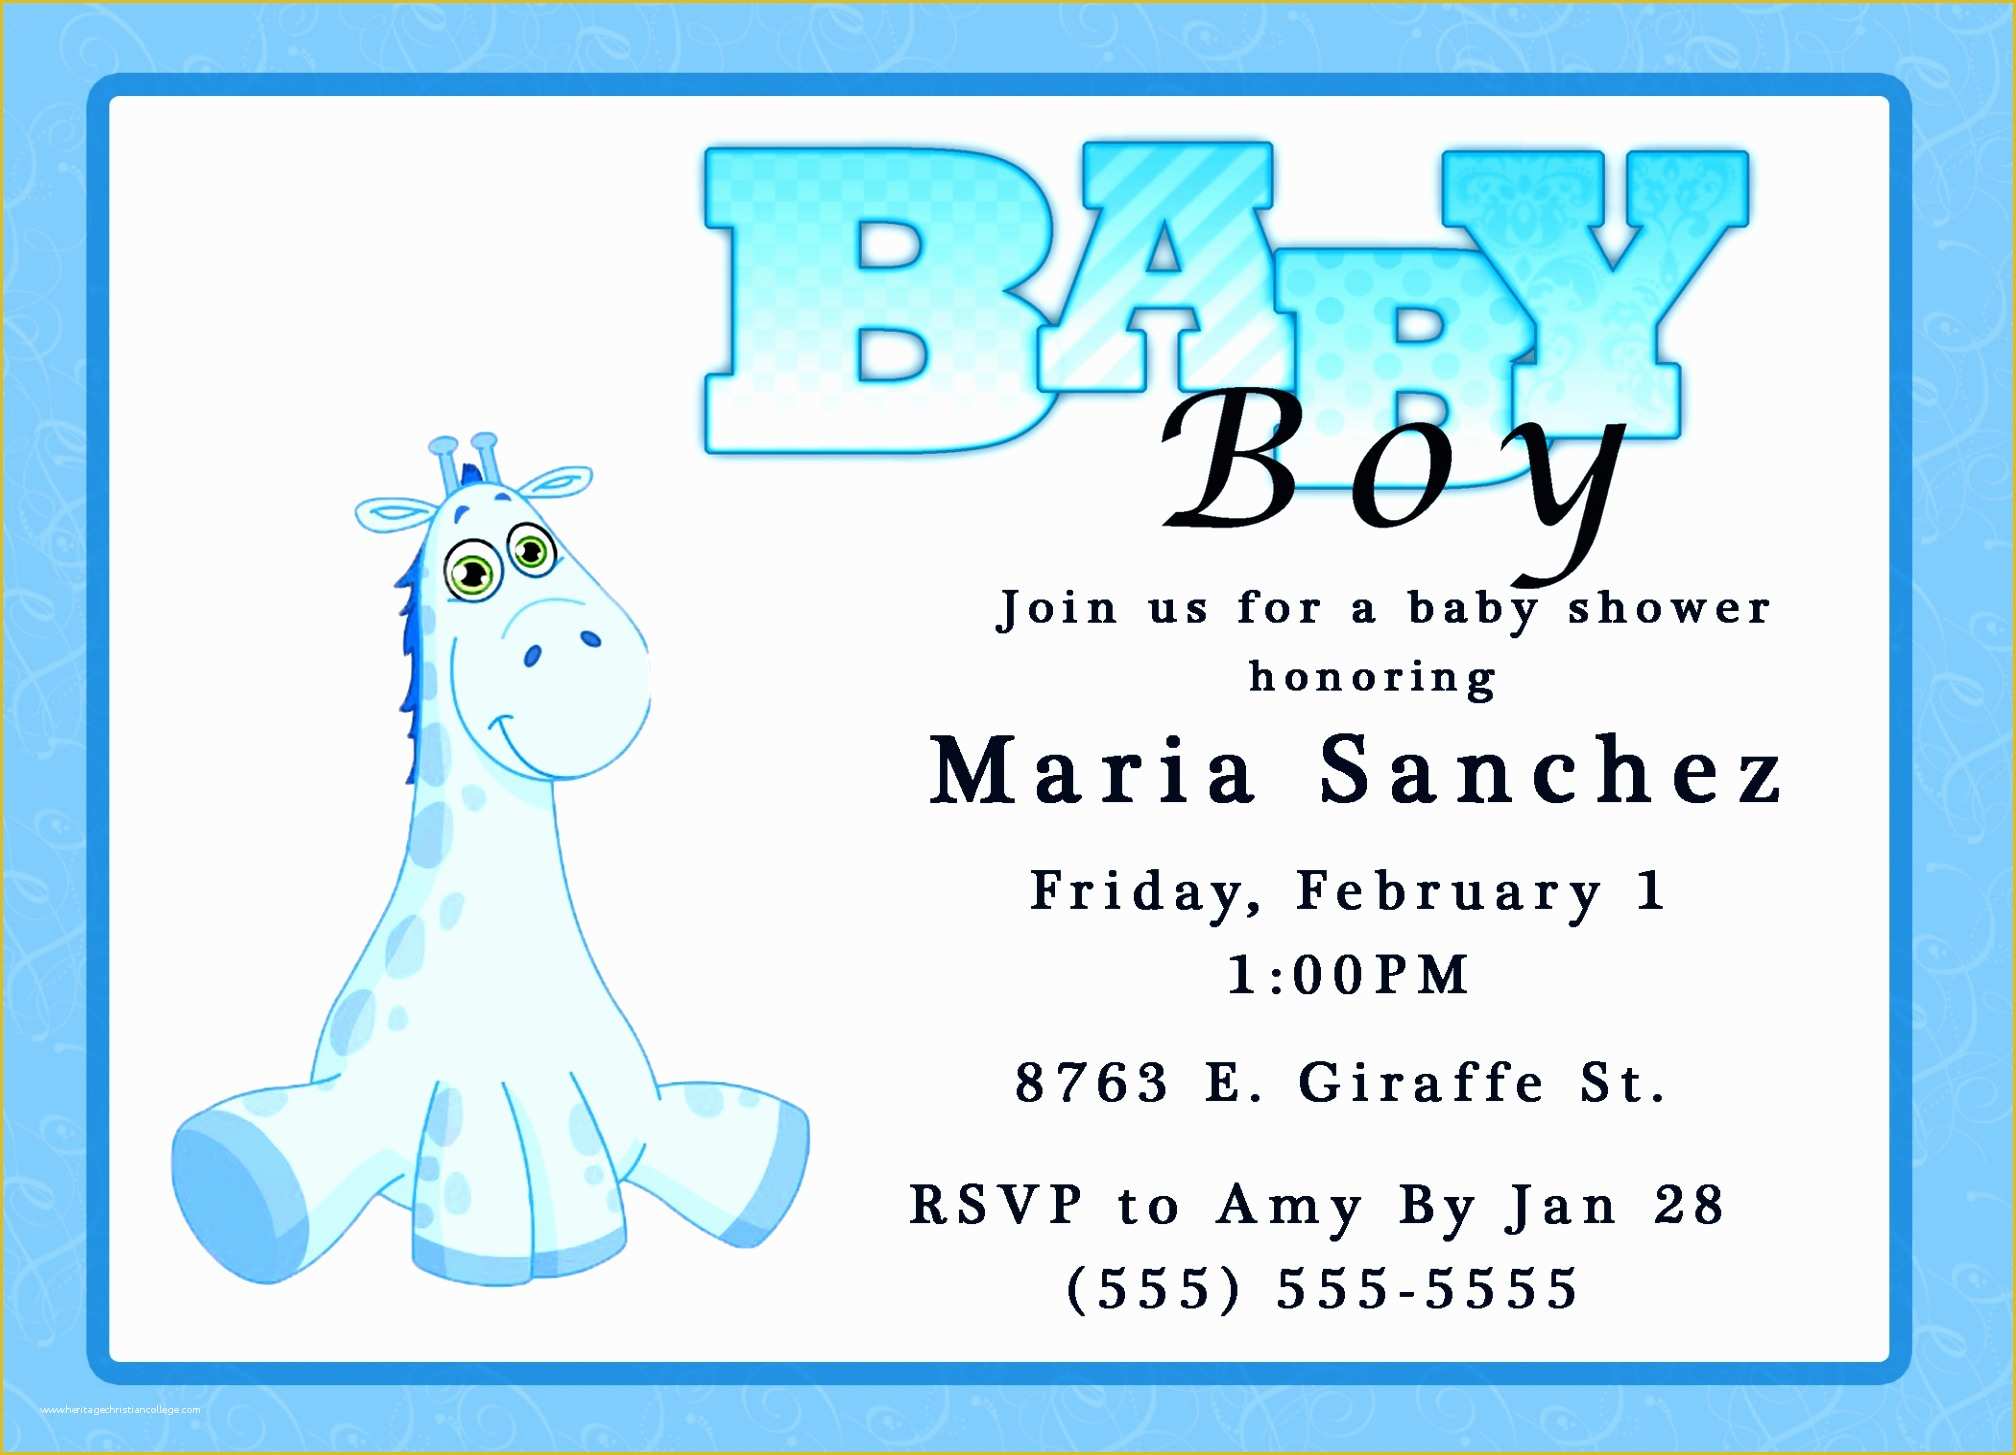 Baby Shower Invitations Templates Free Download Of Printable Baby Shower Invites Template Resume Builder